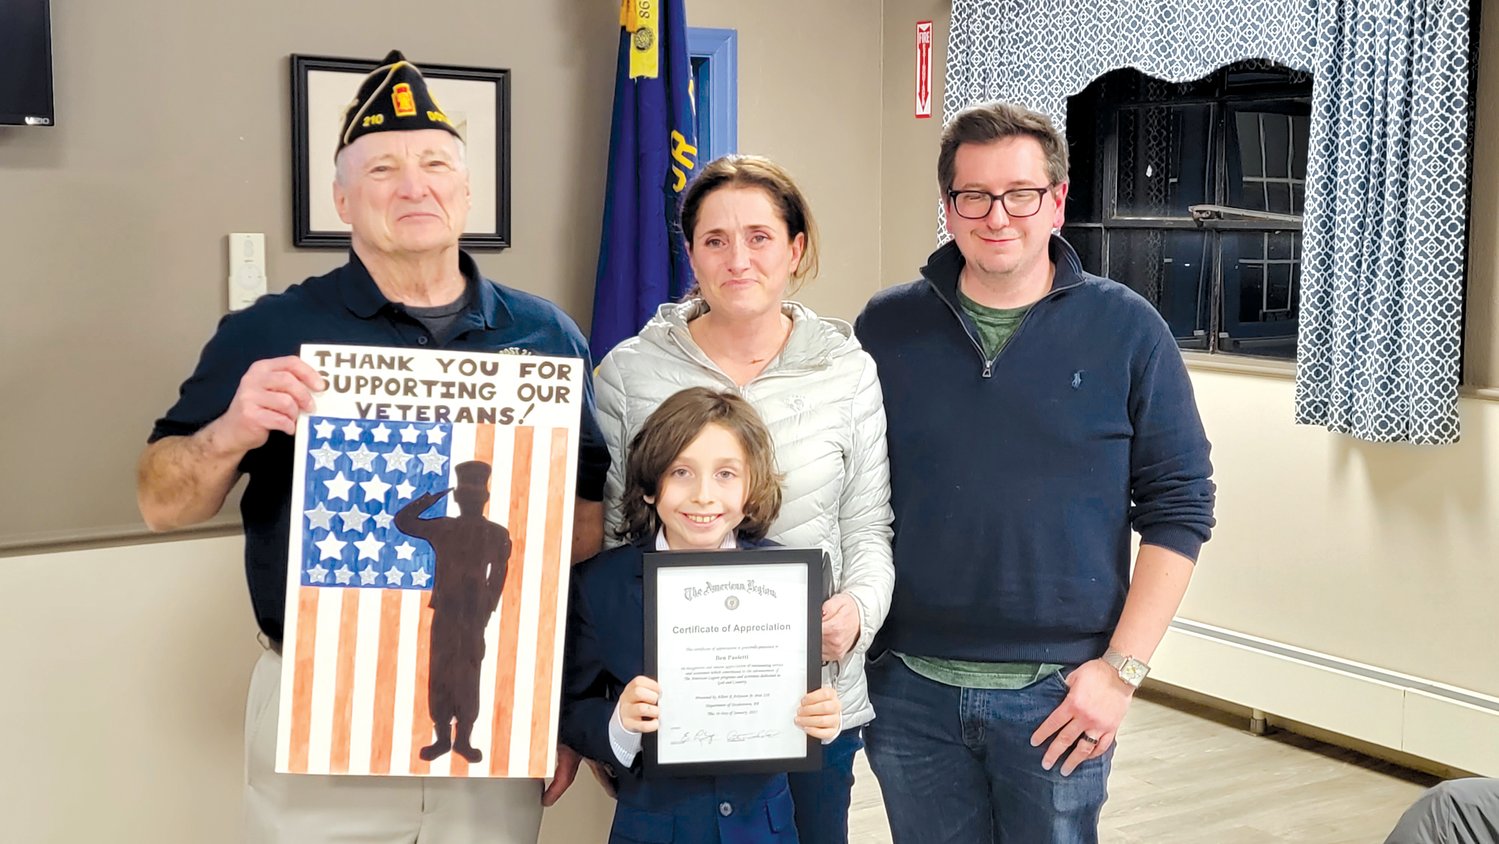 Ben Paoletti, 9, with Peter Scott, commander of Doylestown American Legion Post 210, left, and parents Larisa and Johnathan Paoletti, receives recognition for his efforts on behalf of veterans.